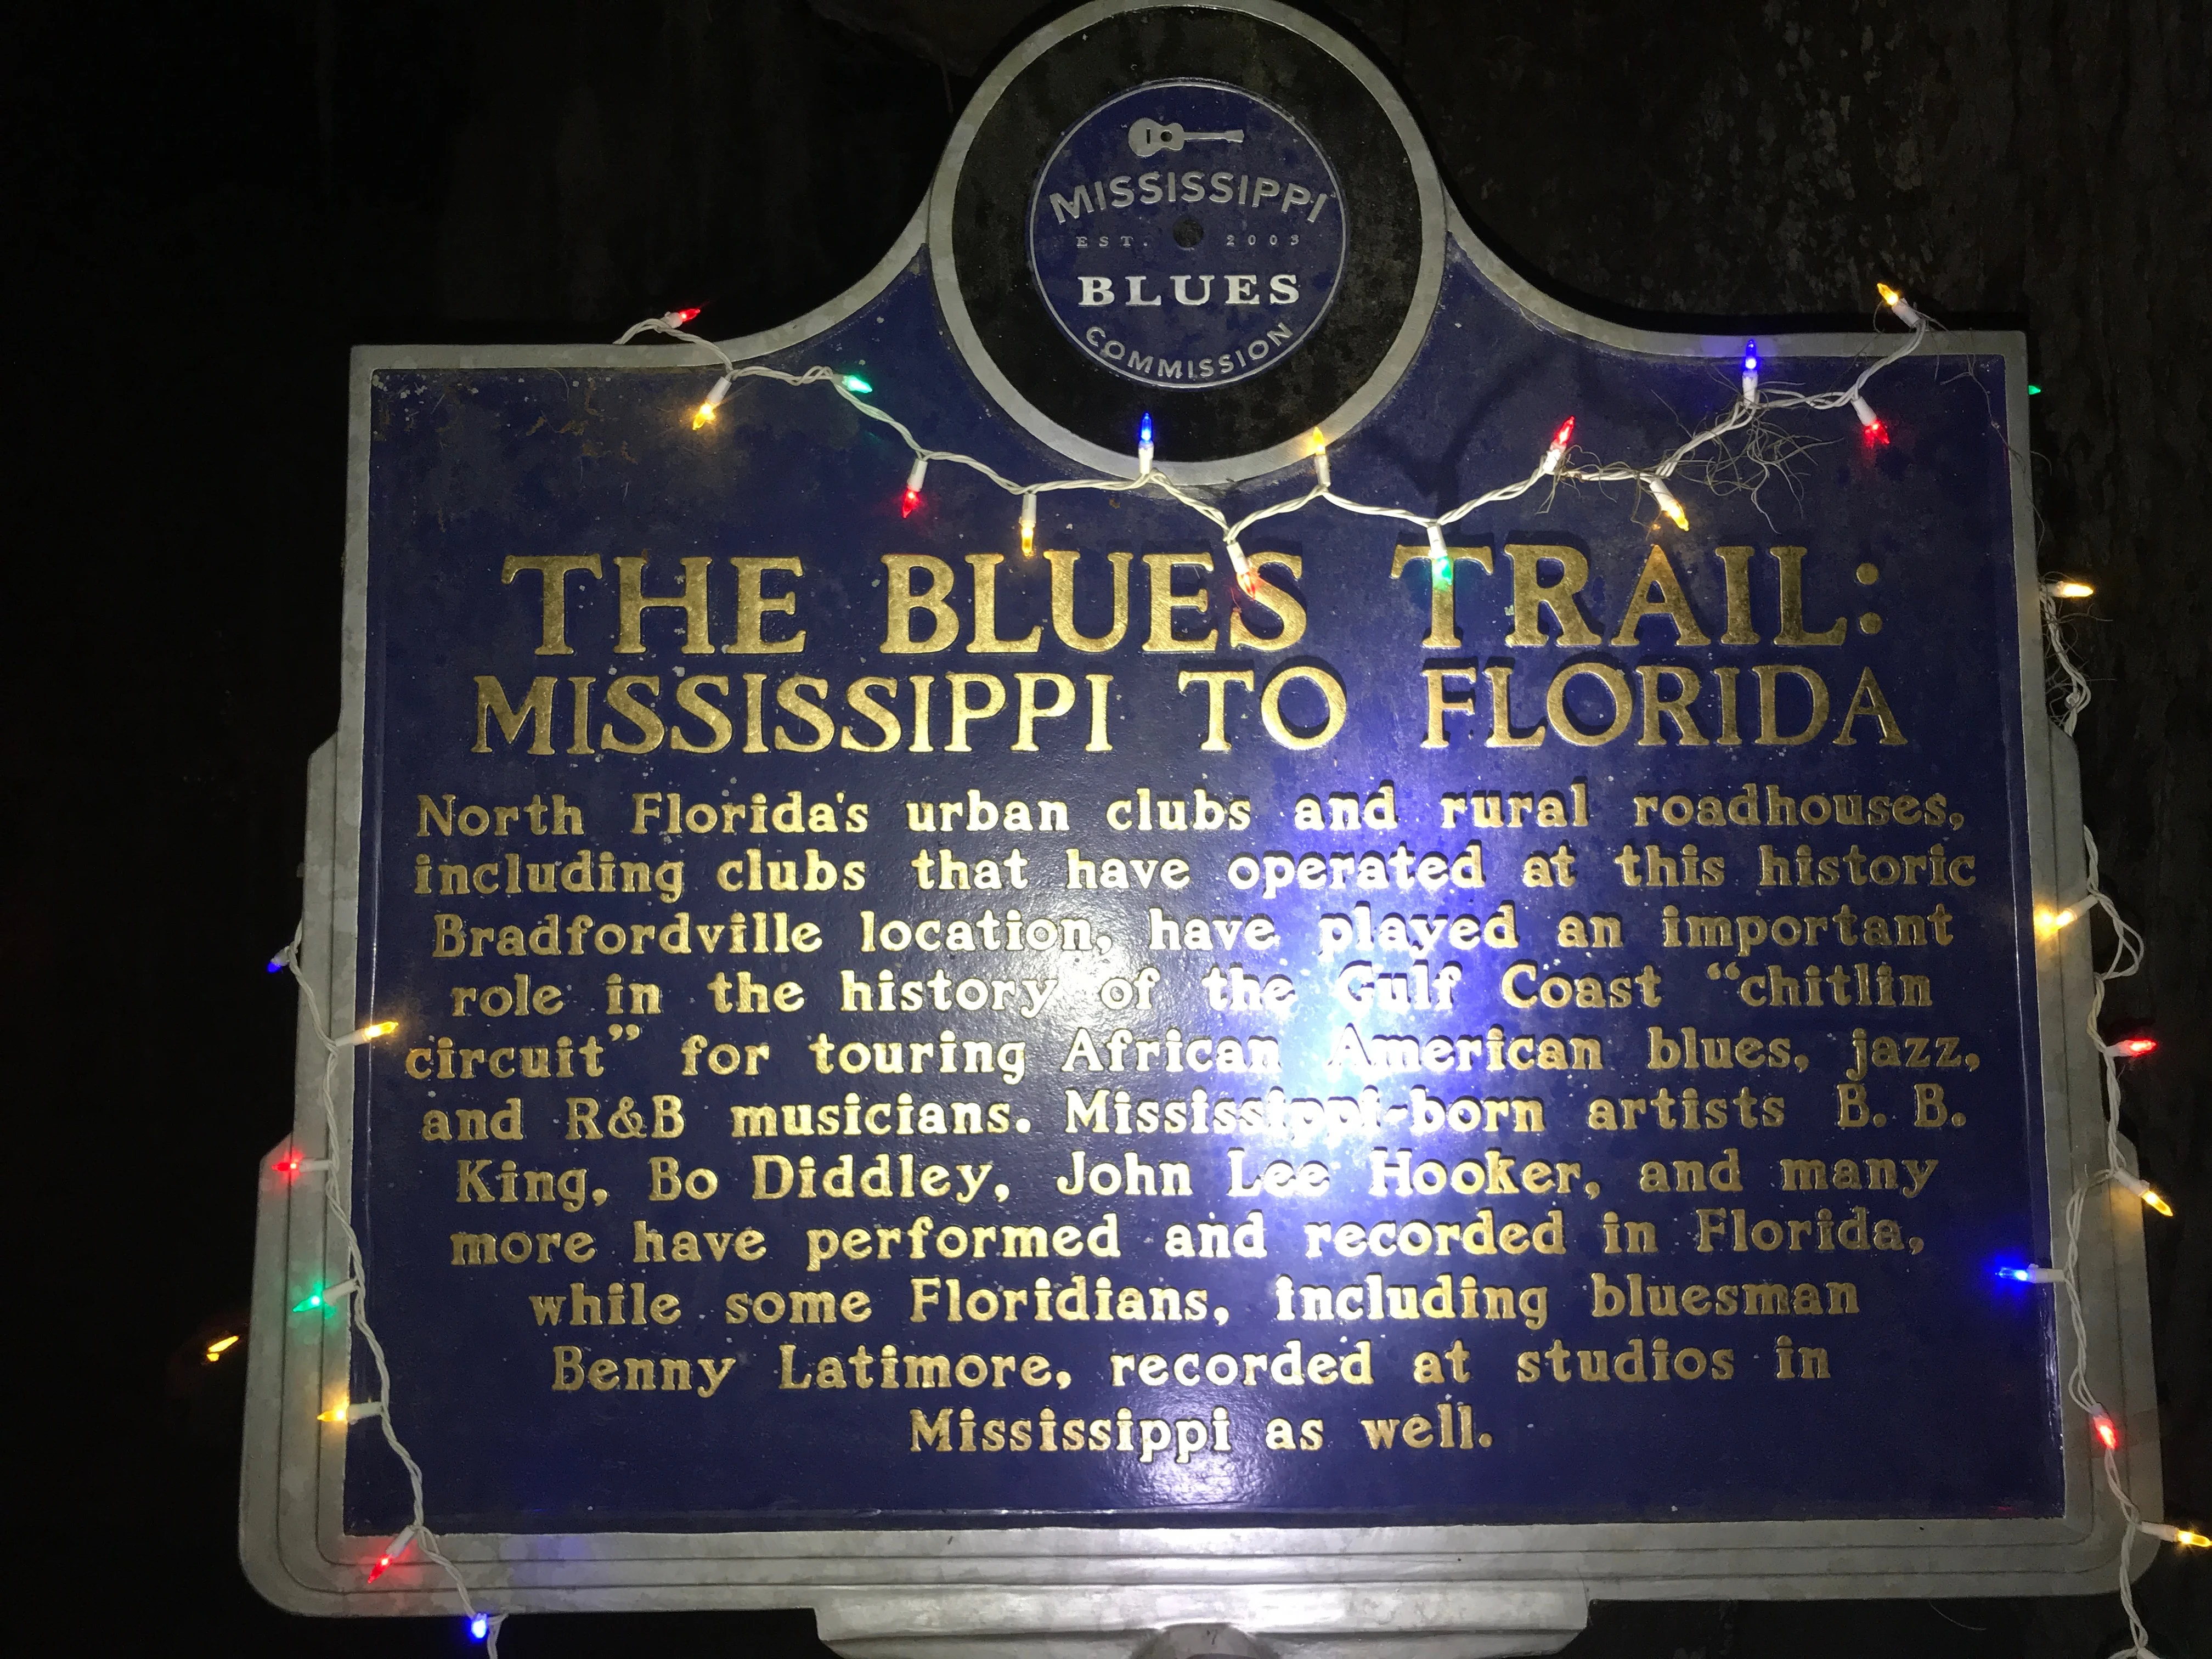 Blues Trail Marker. https://commons.wikimedia.org/w/index.php?search=Mississippi+blues+trail&title=Special:MediaSearch&go=Go&type=image